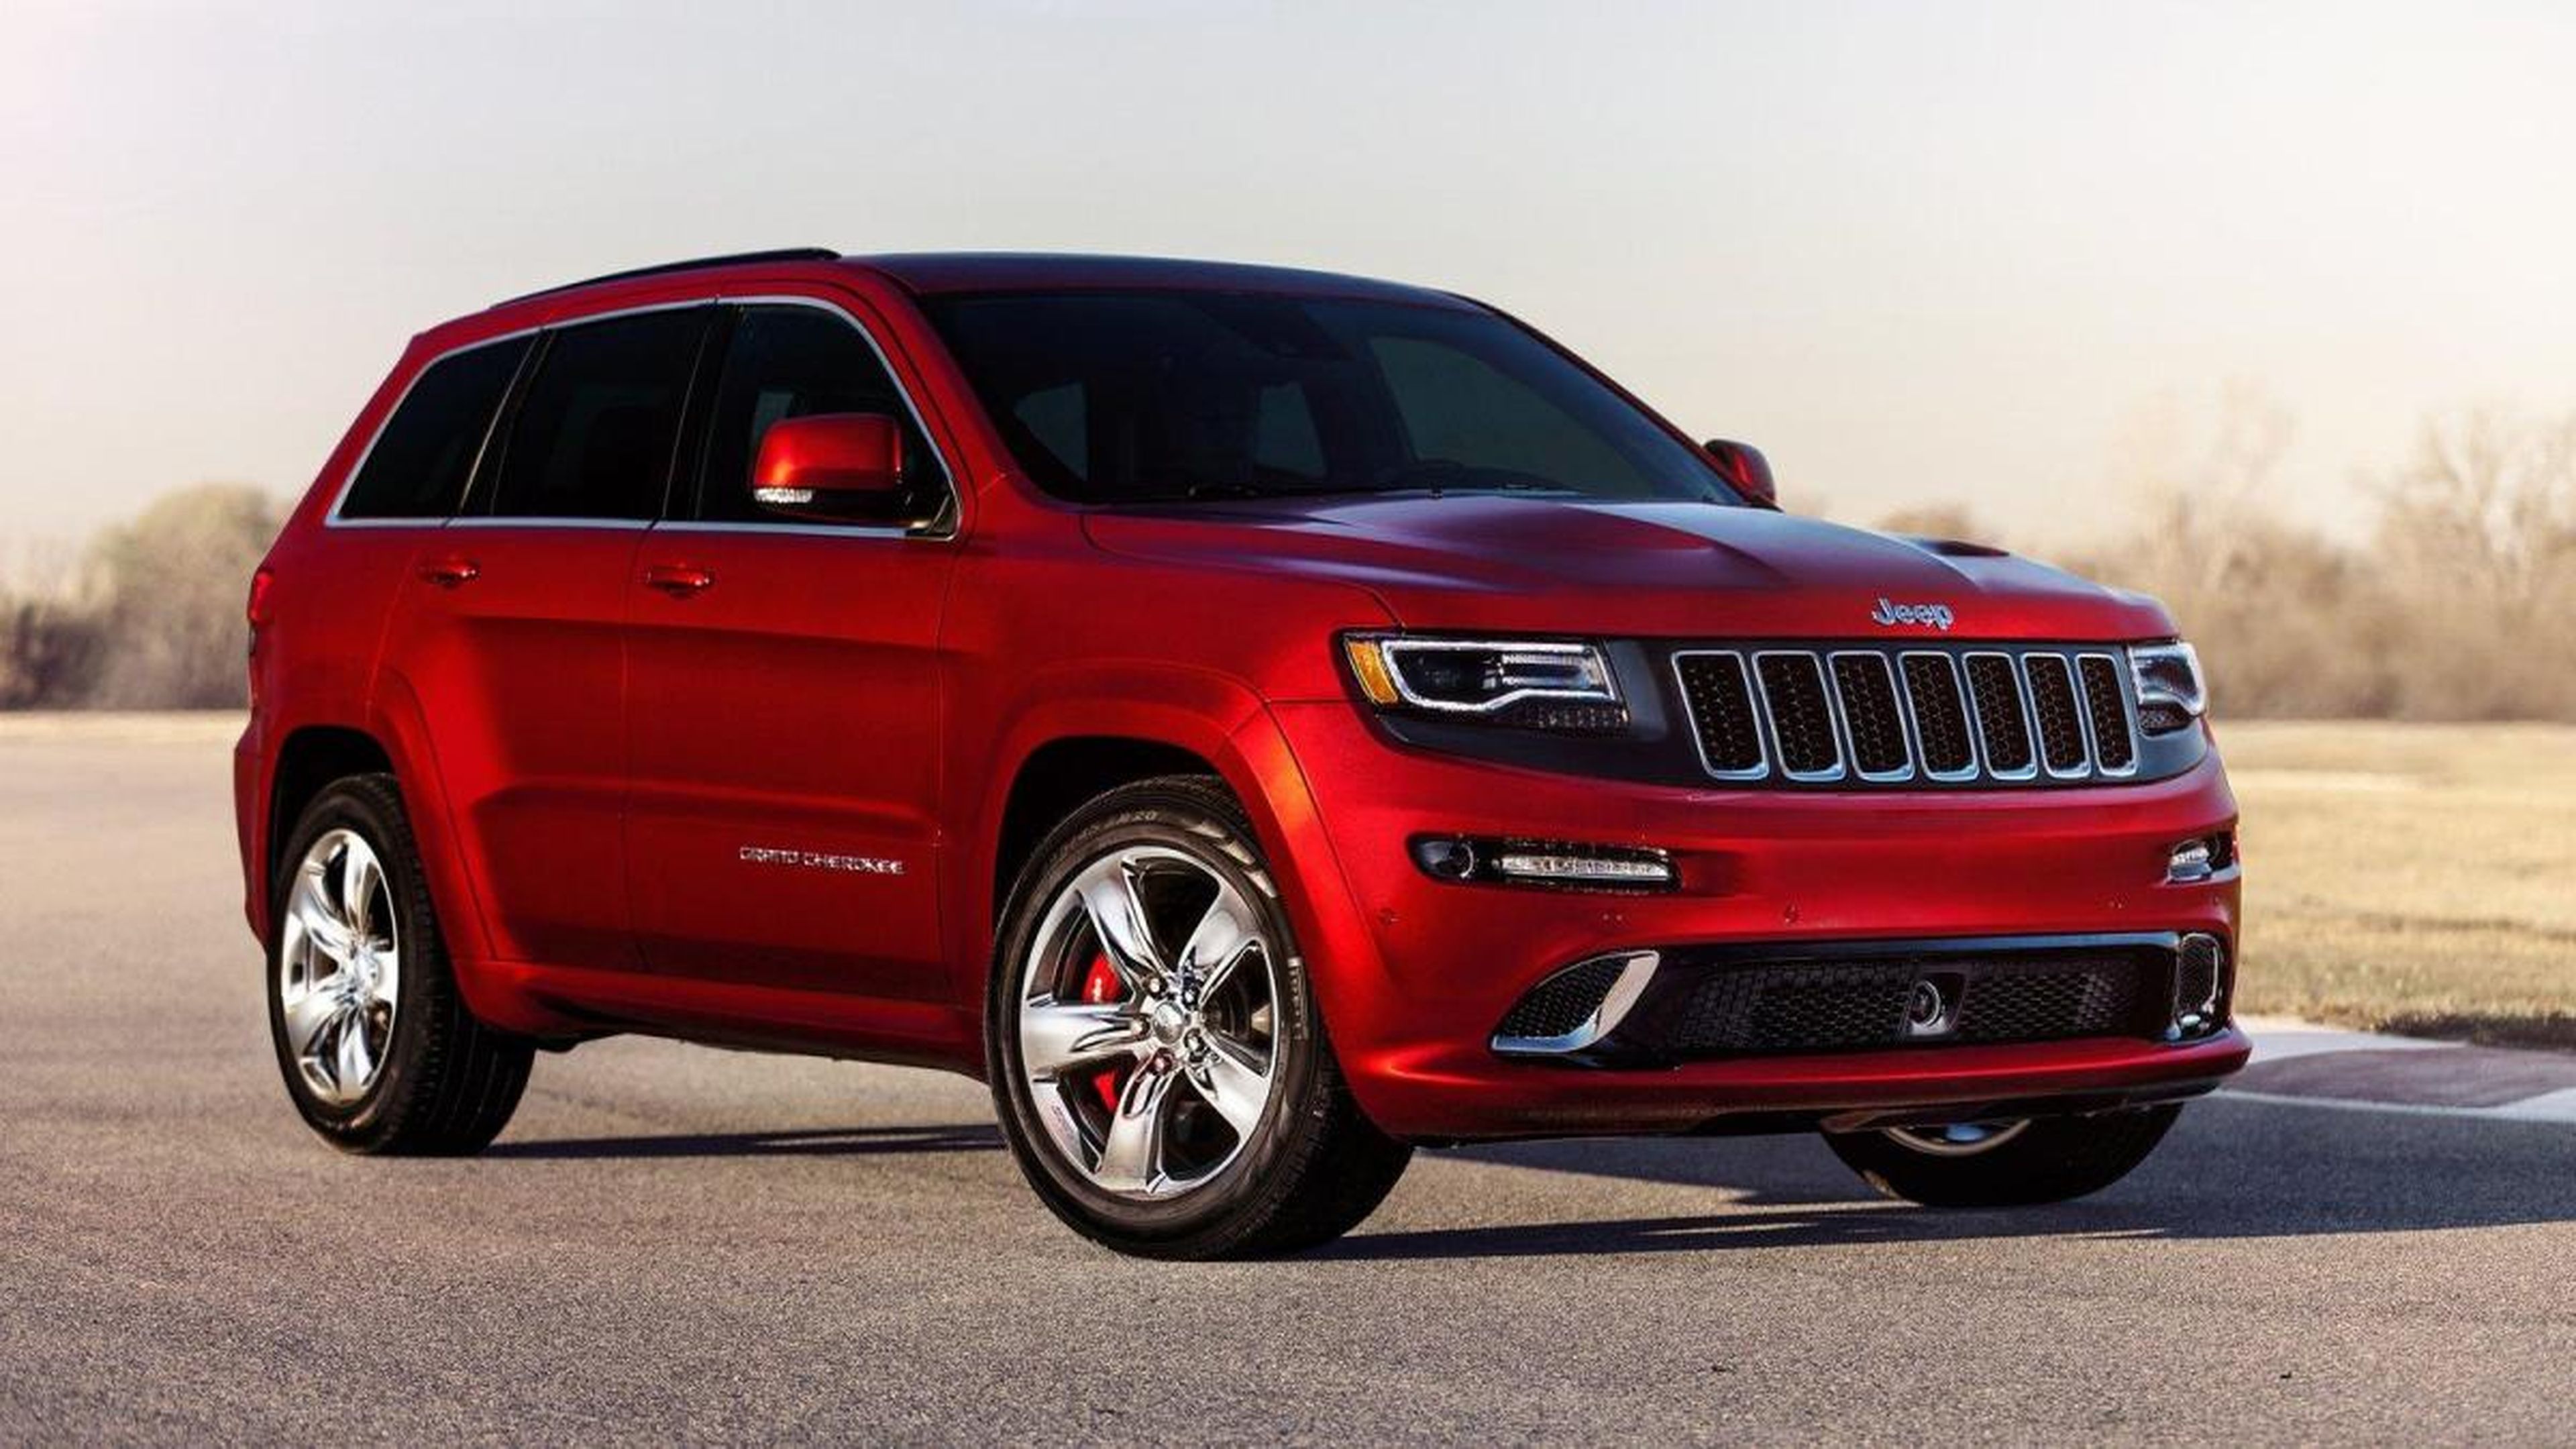 Jeep Grand Cherokee SRT 2016 frontal/lateral